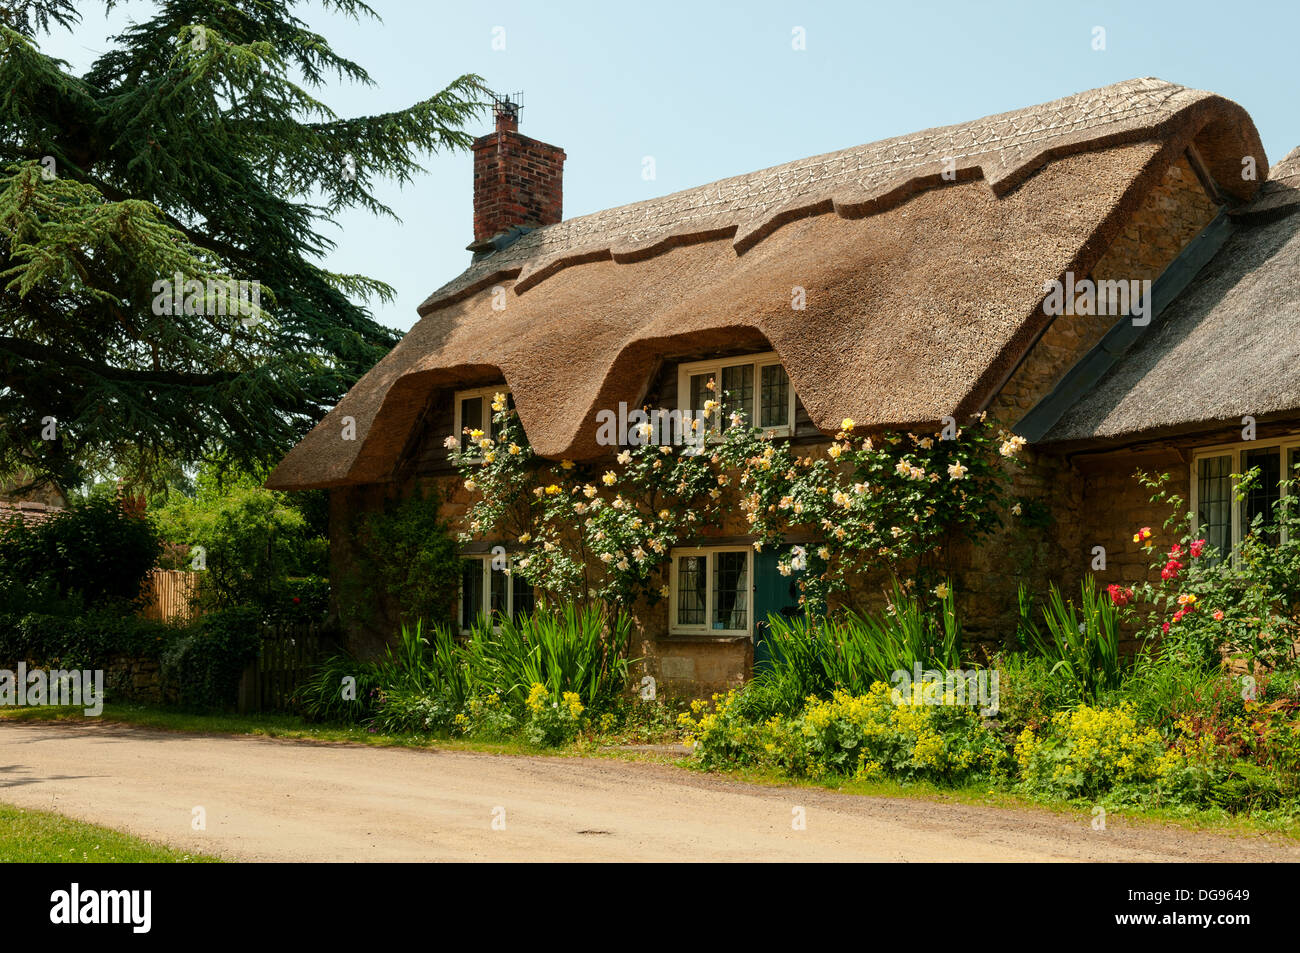 Thatched Cottage at Hidcote Manor, Gloucestershire, England Stock Photo